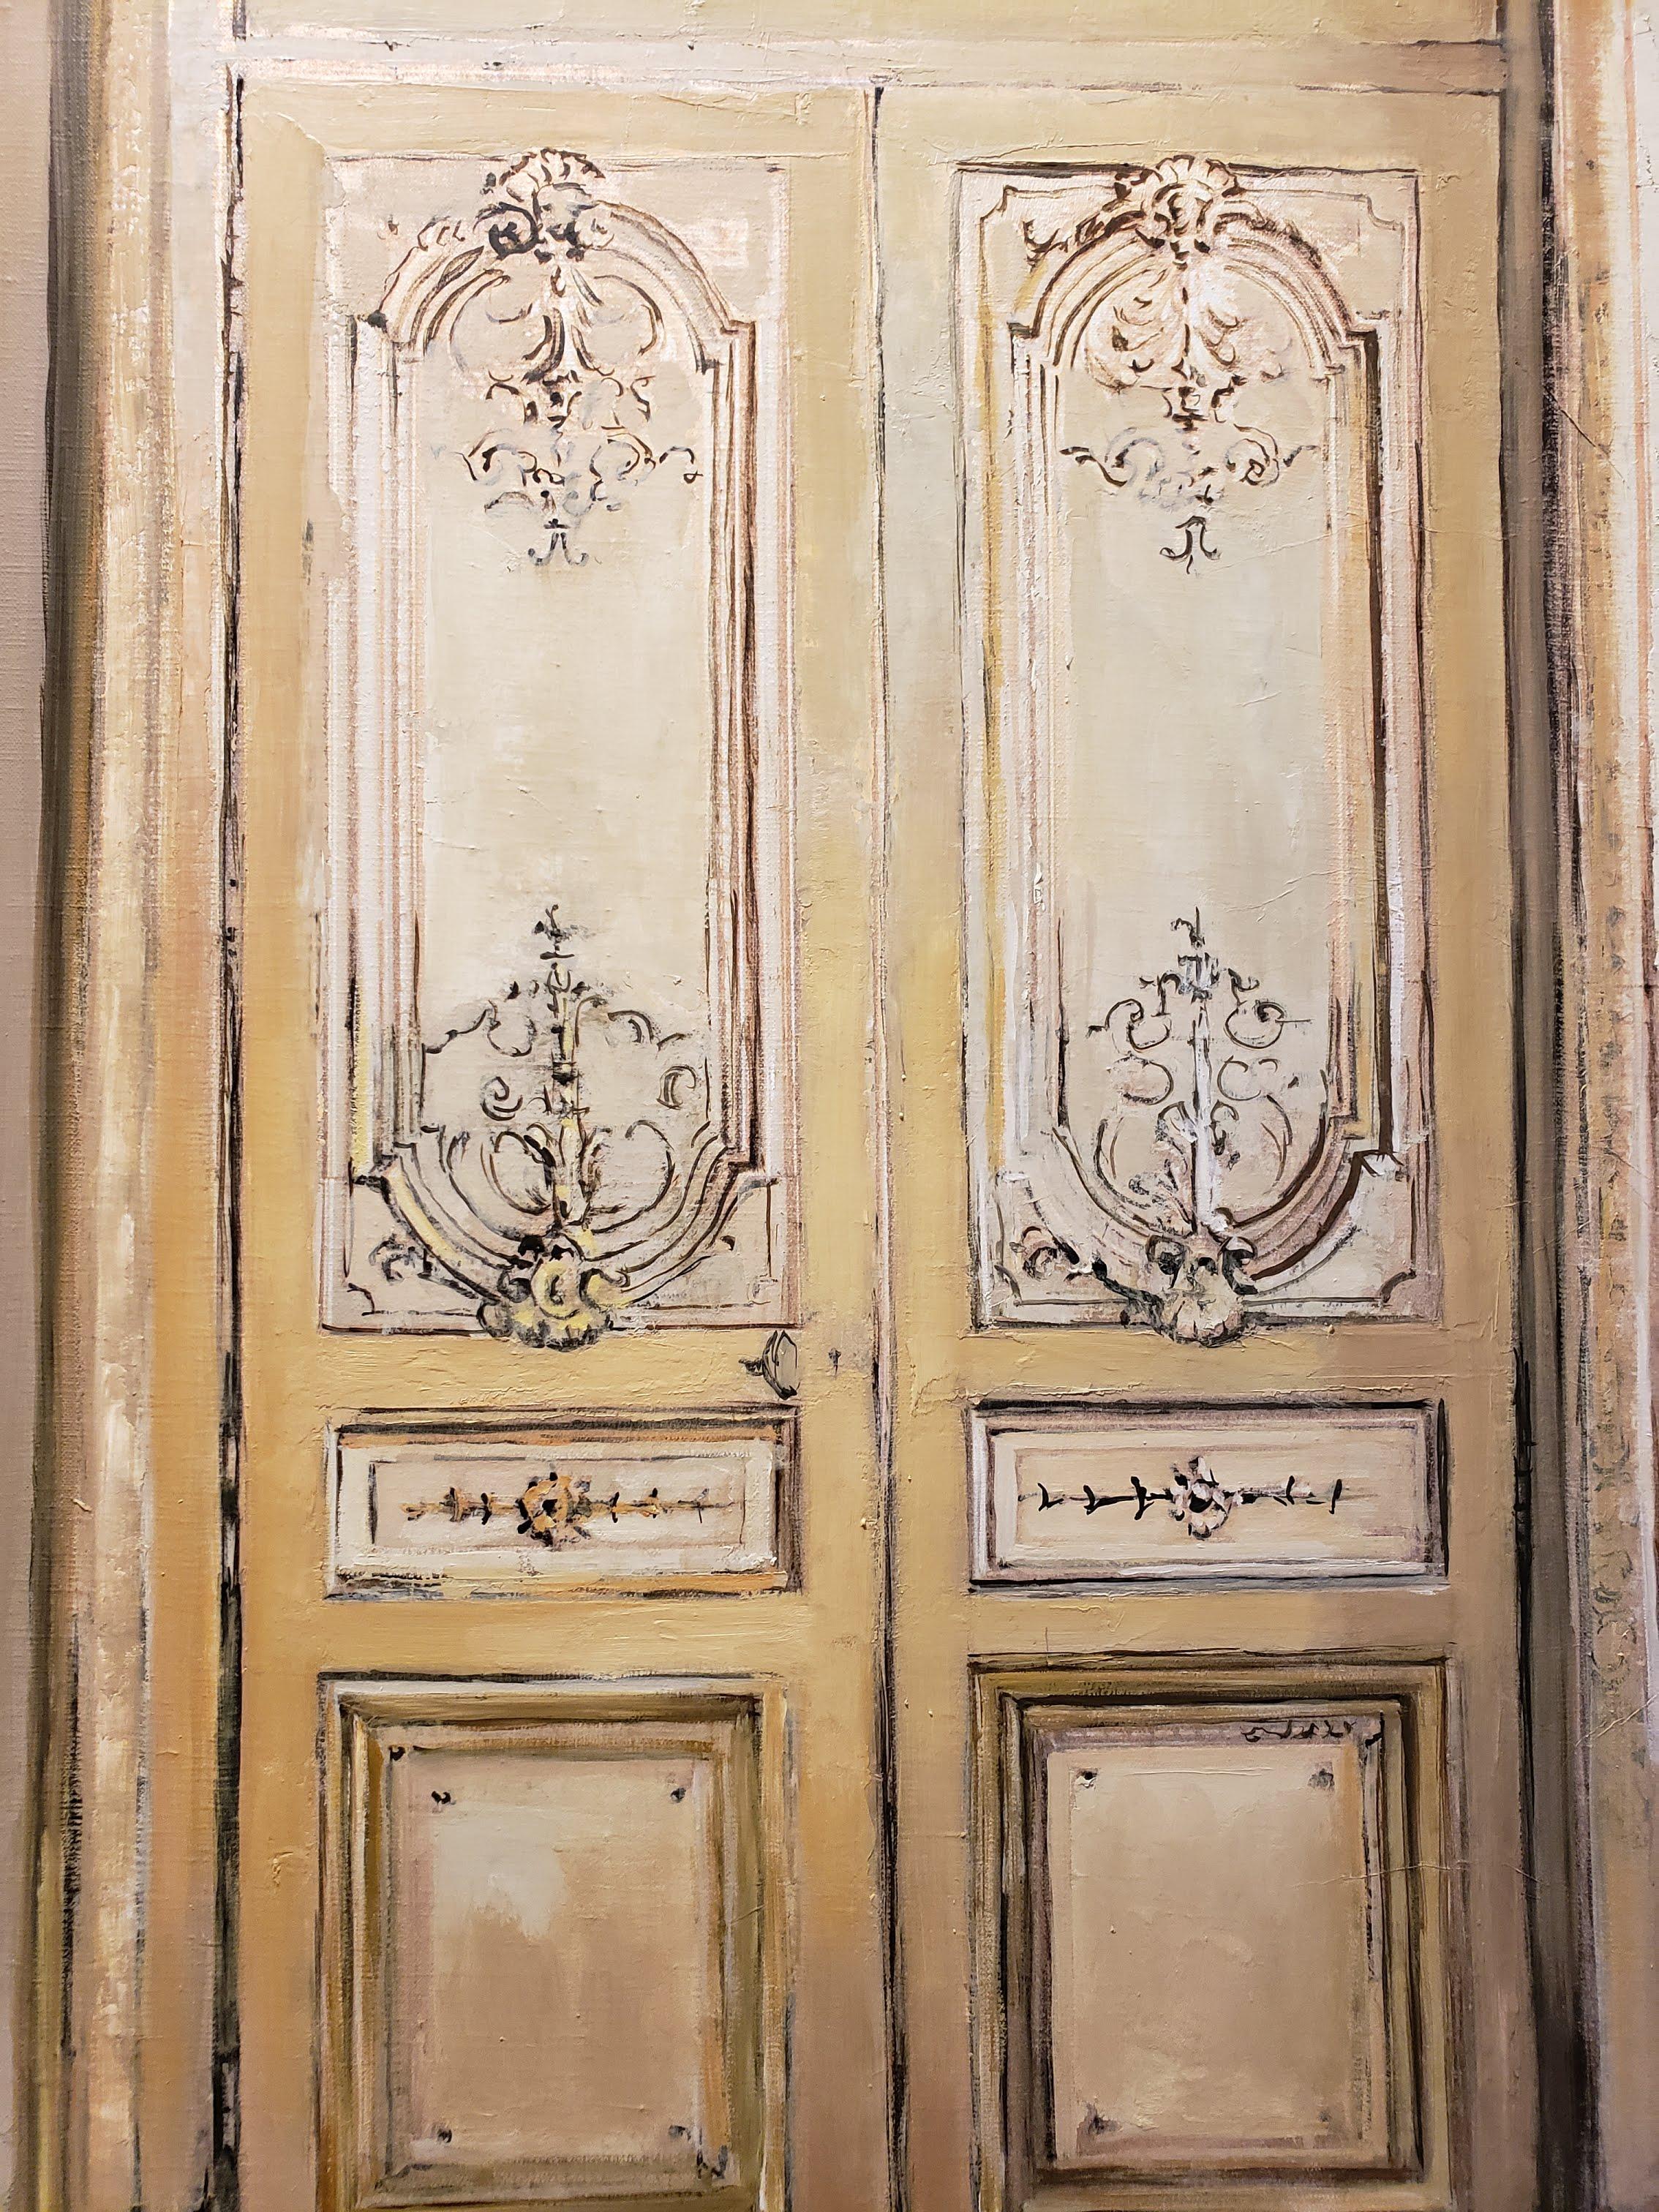 Depiction of an ornately decorated door. Beiges and greys. Oil and silver on canvas. 

Patrick Pietropoli was a teacher of political studies for several years before becoming a professional artist. Trained as both a painter and a sculptor, his oil